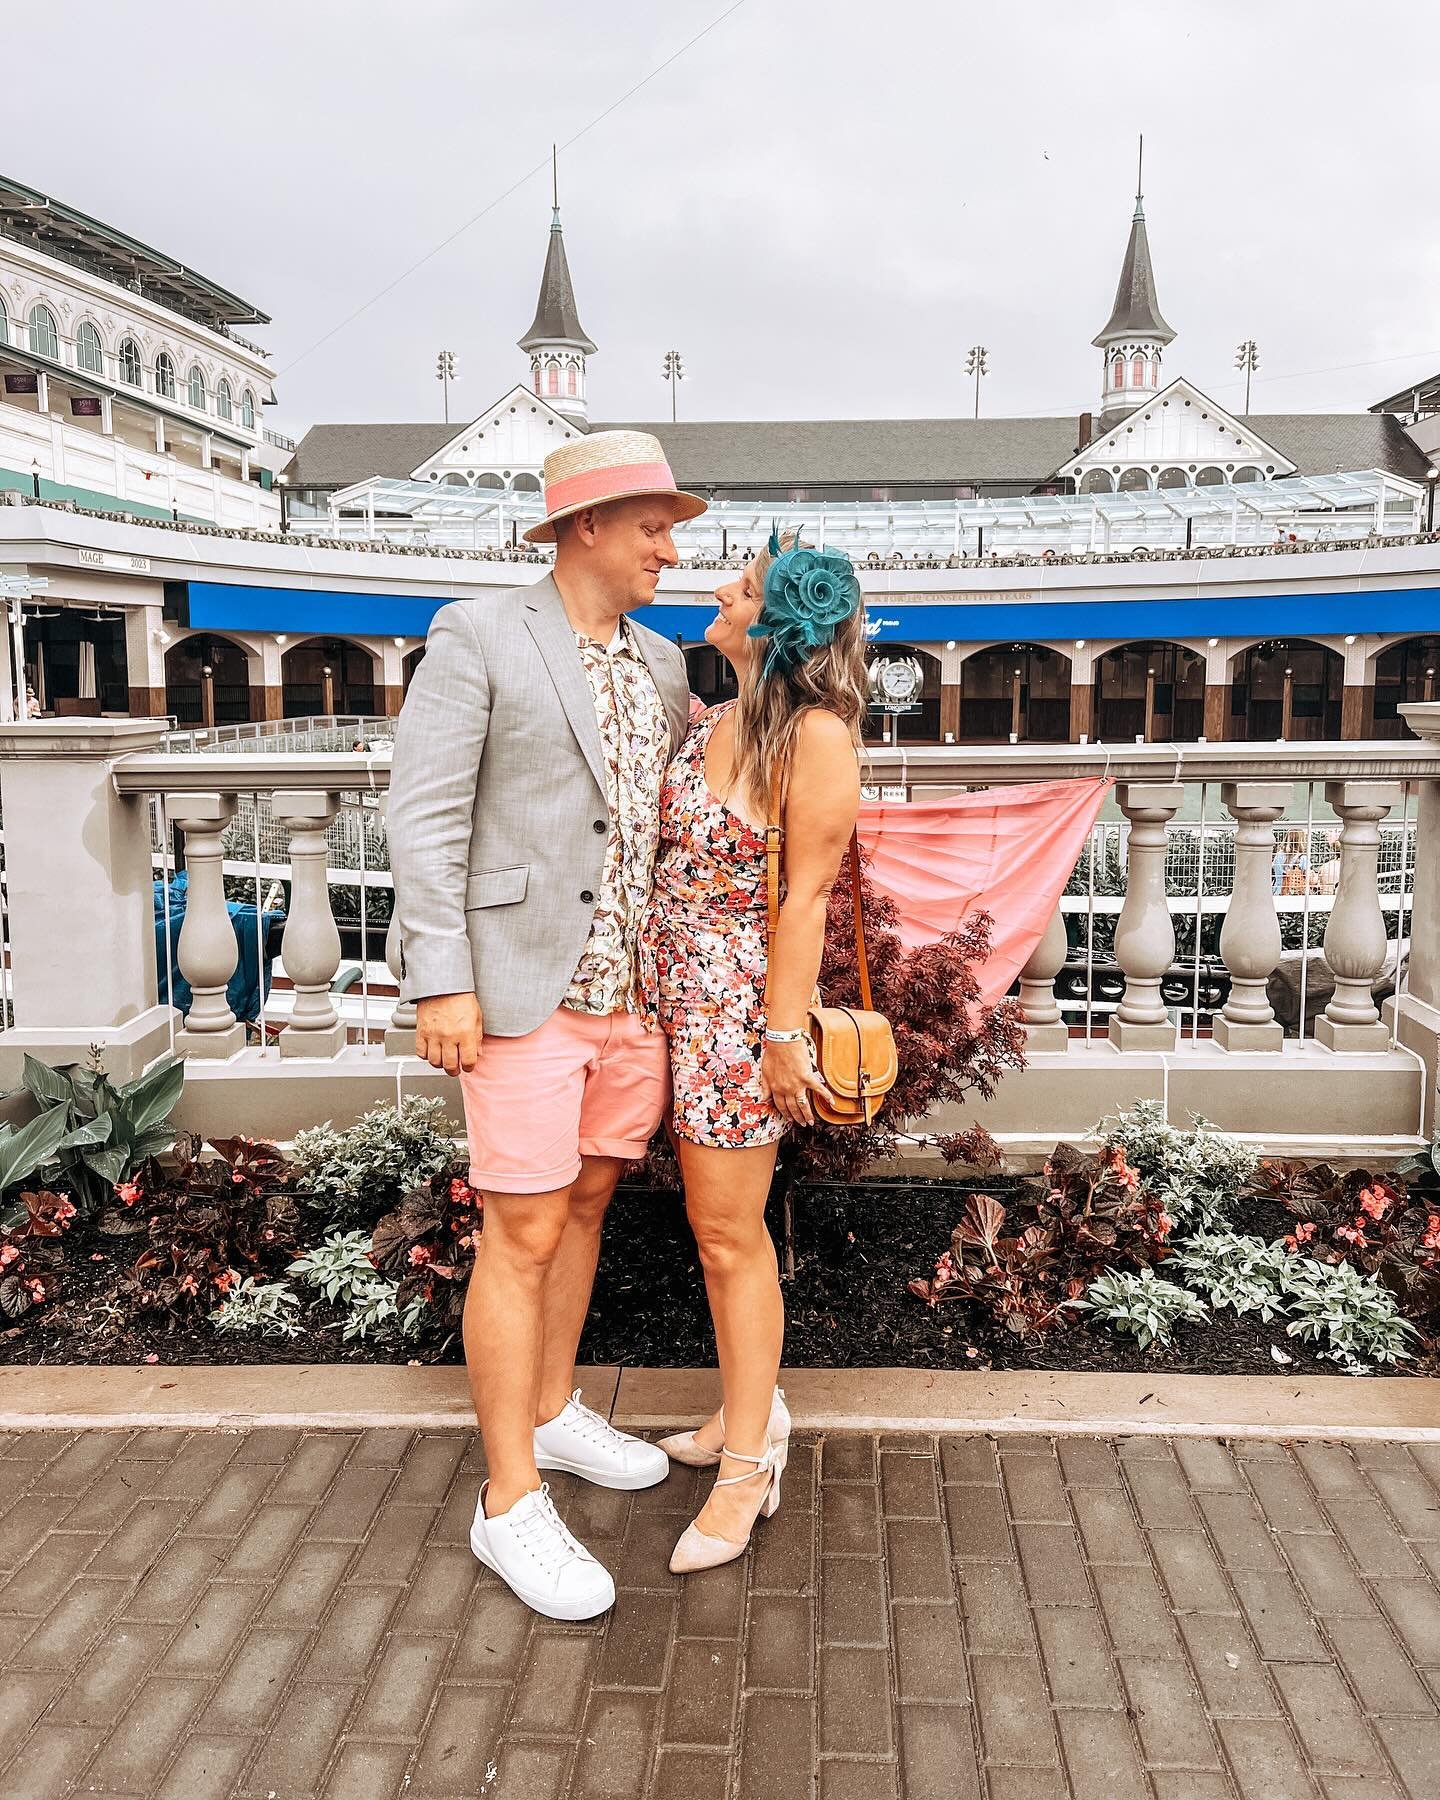 DERBY DROP 🥃👒🐎

This trip was a bucket list for us and I don&rsquo;t think we could&rsquo;ve given it a finger nail more. A year ago we realized the Kentucky Derby would be on our anniversary and so we spent the last year planning outfits, tours, 